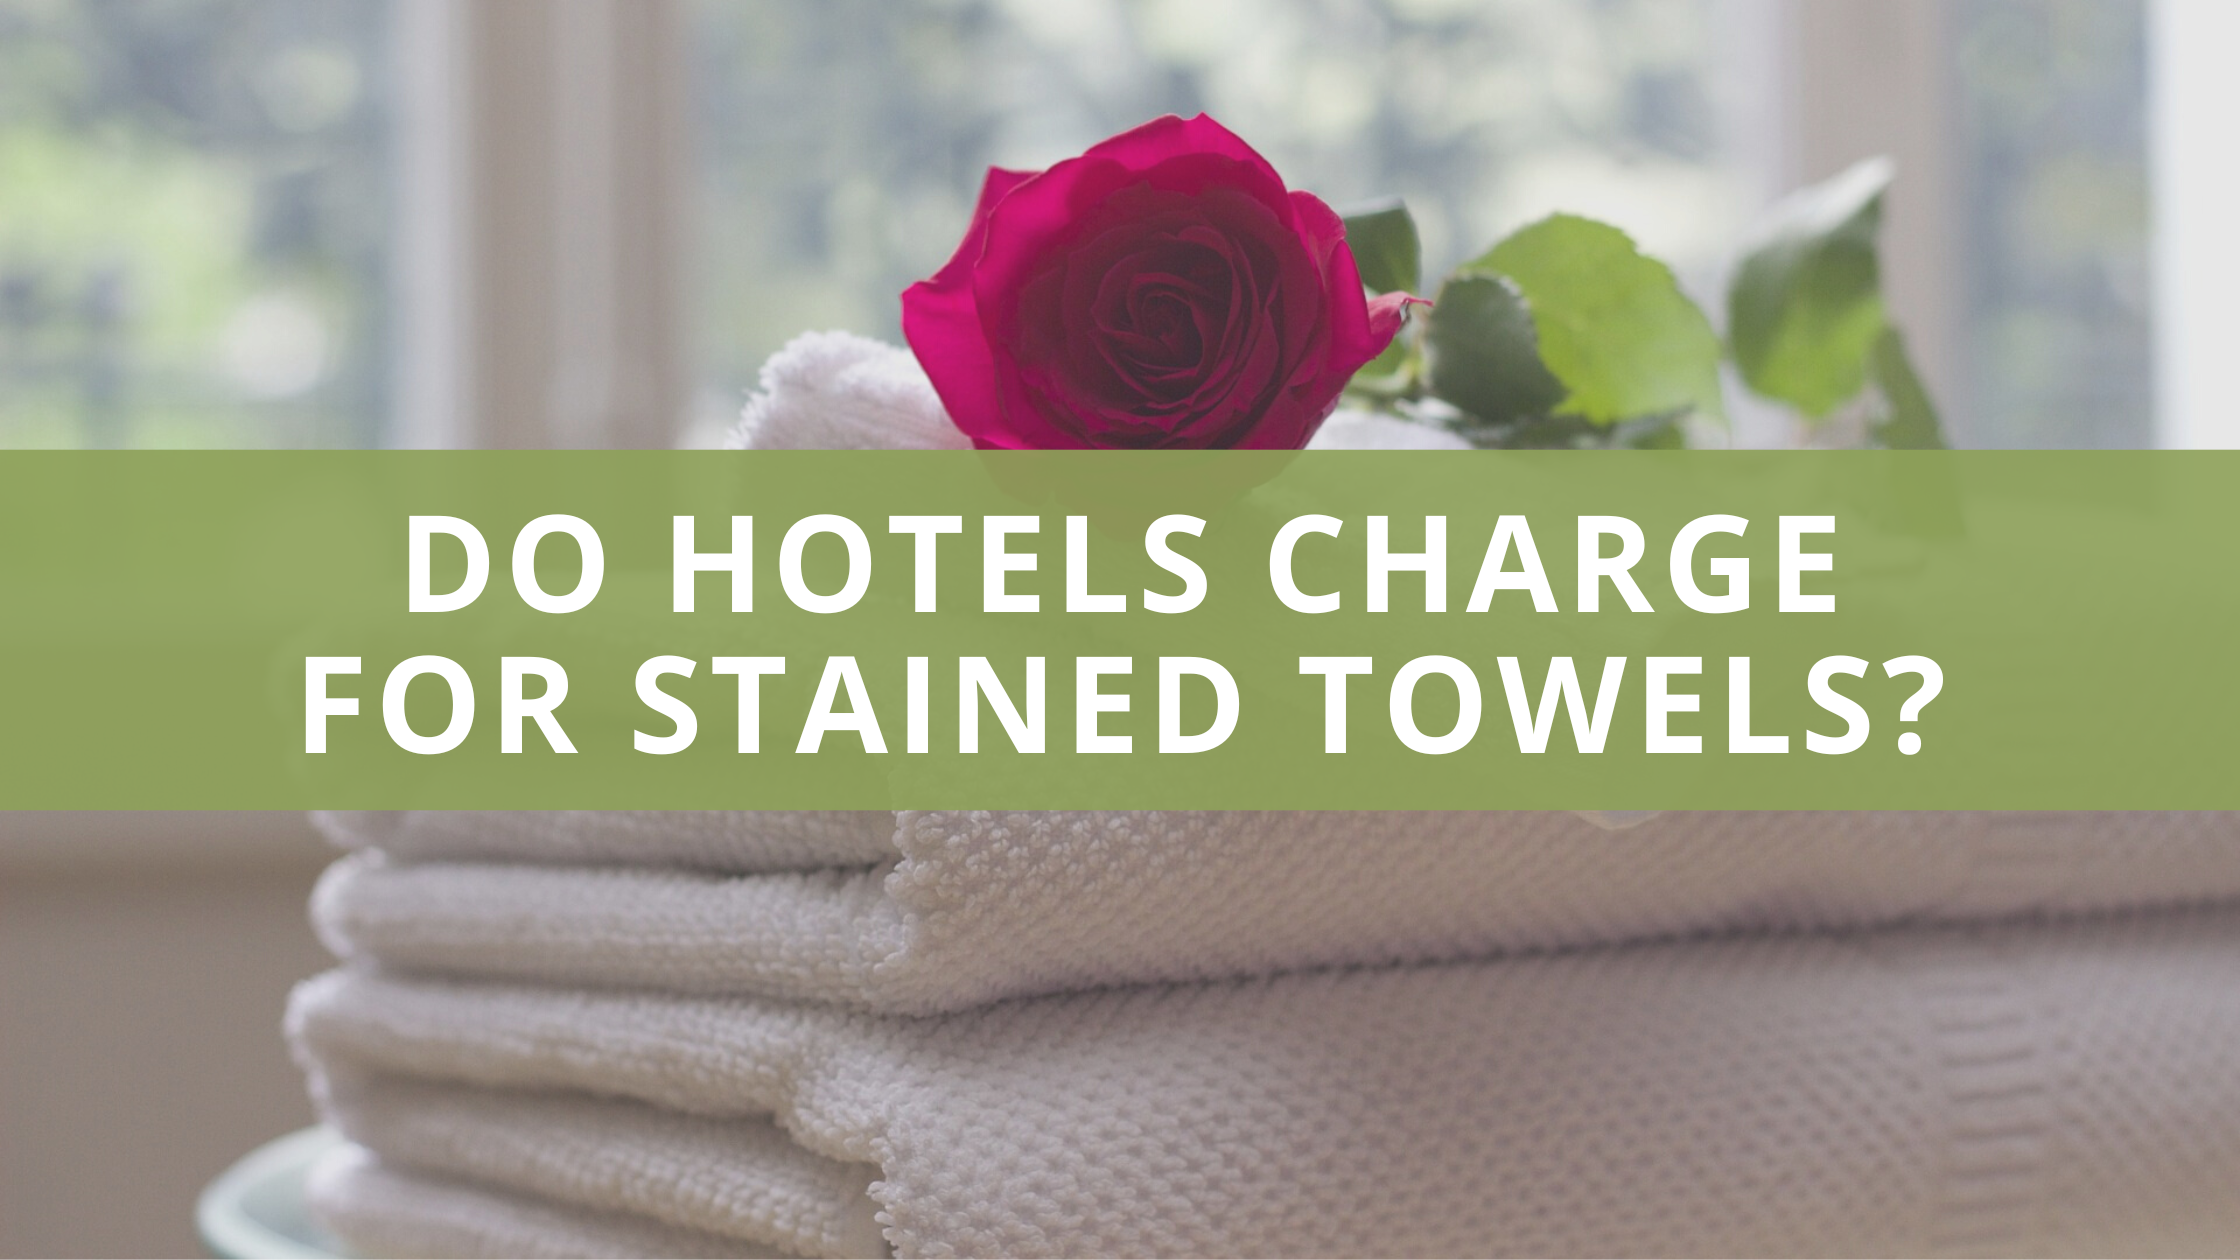 Do hotels charge for stained towels?